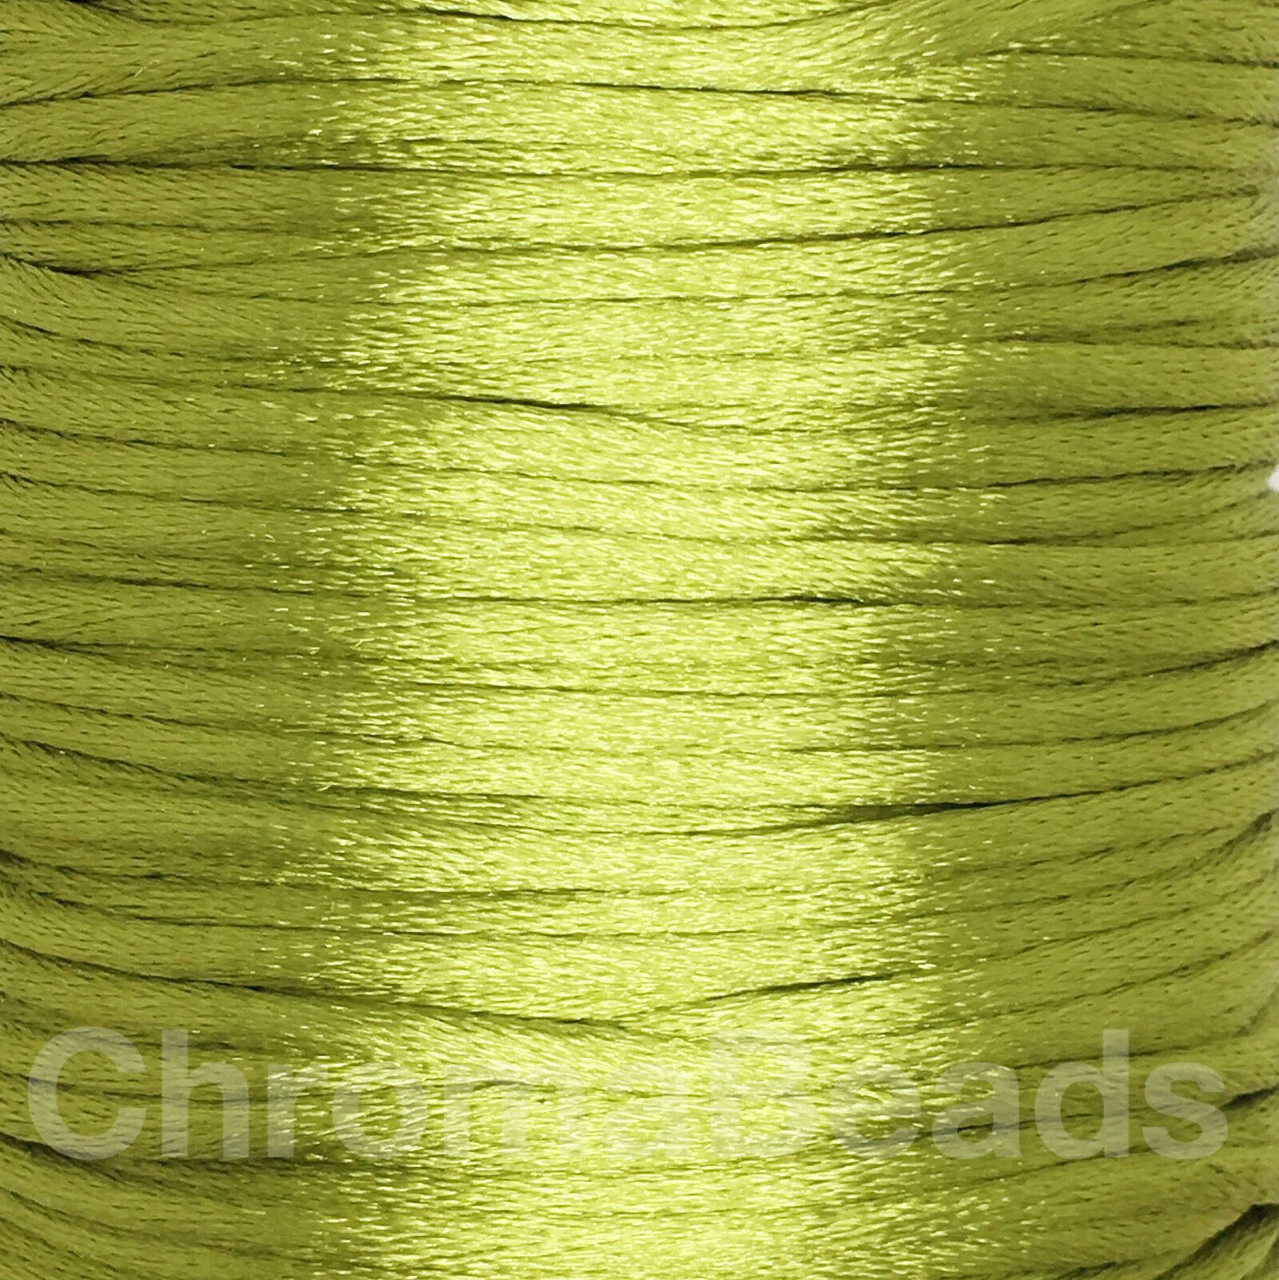 Reel of Nylon Cord (Rattail) - Olive Green, approx 90m